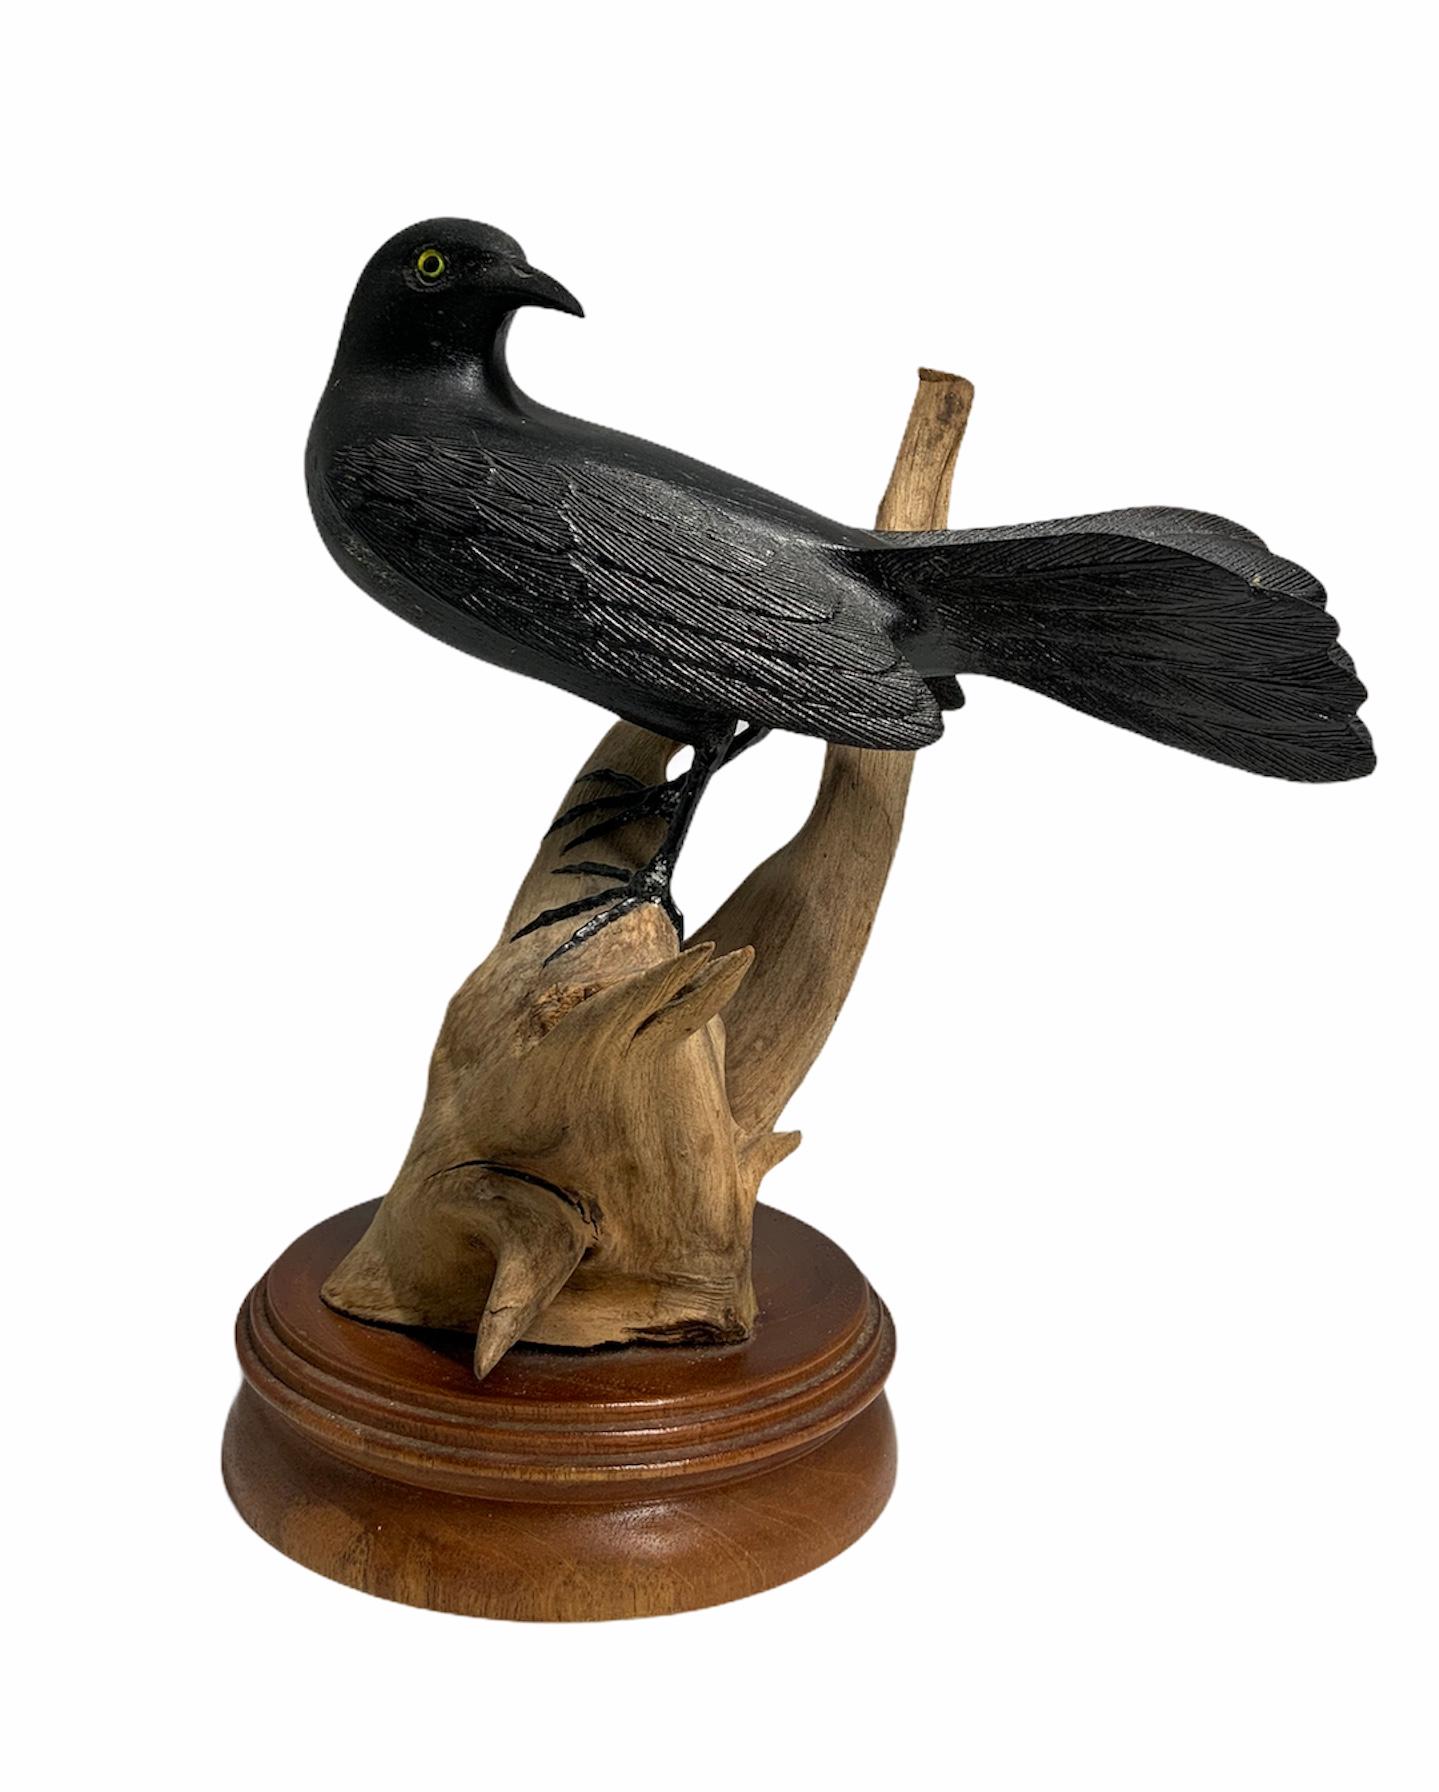 This a hand carved wood depicting an almost life size black bird (known in Puerto Rico as Chango) or Greater Antillean Grackel. He is very known for his high pitched sound or solicitation call when ready to mate. He is standing proud with a sharp